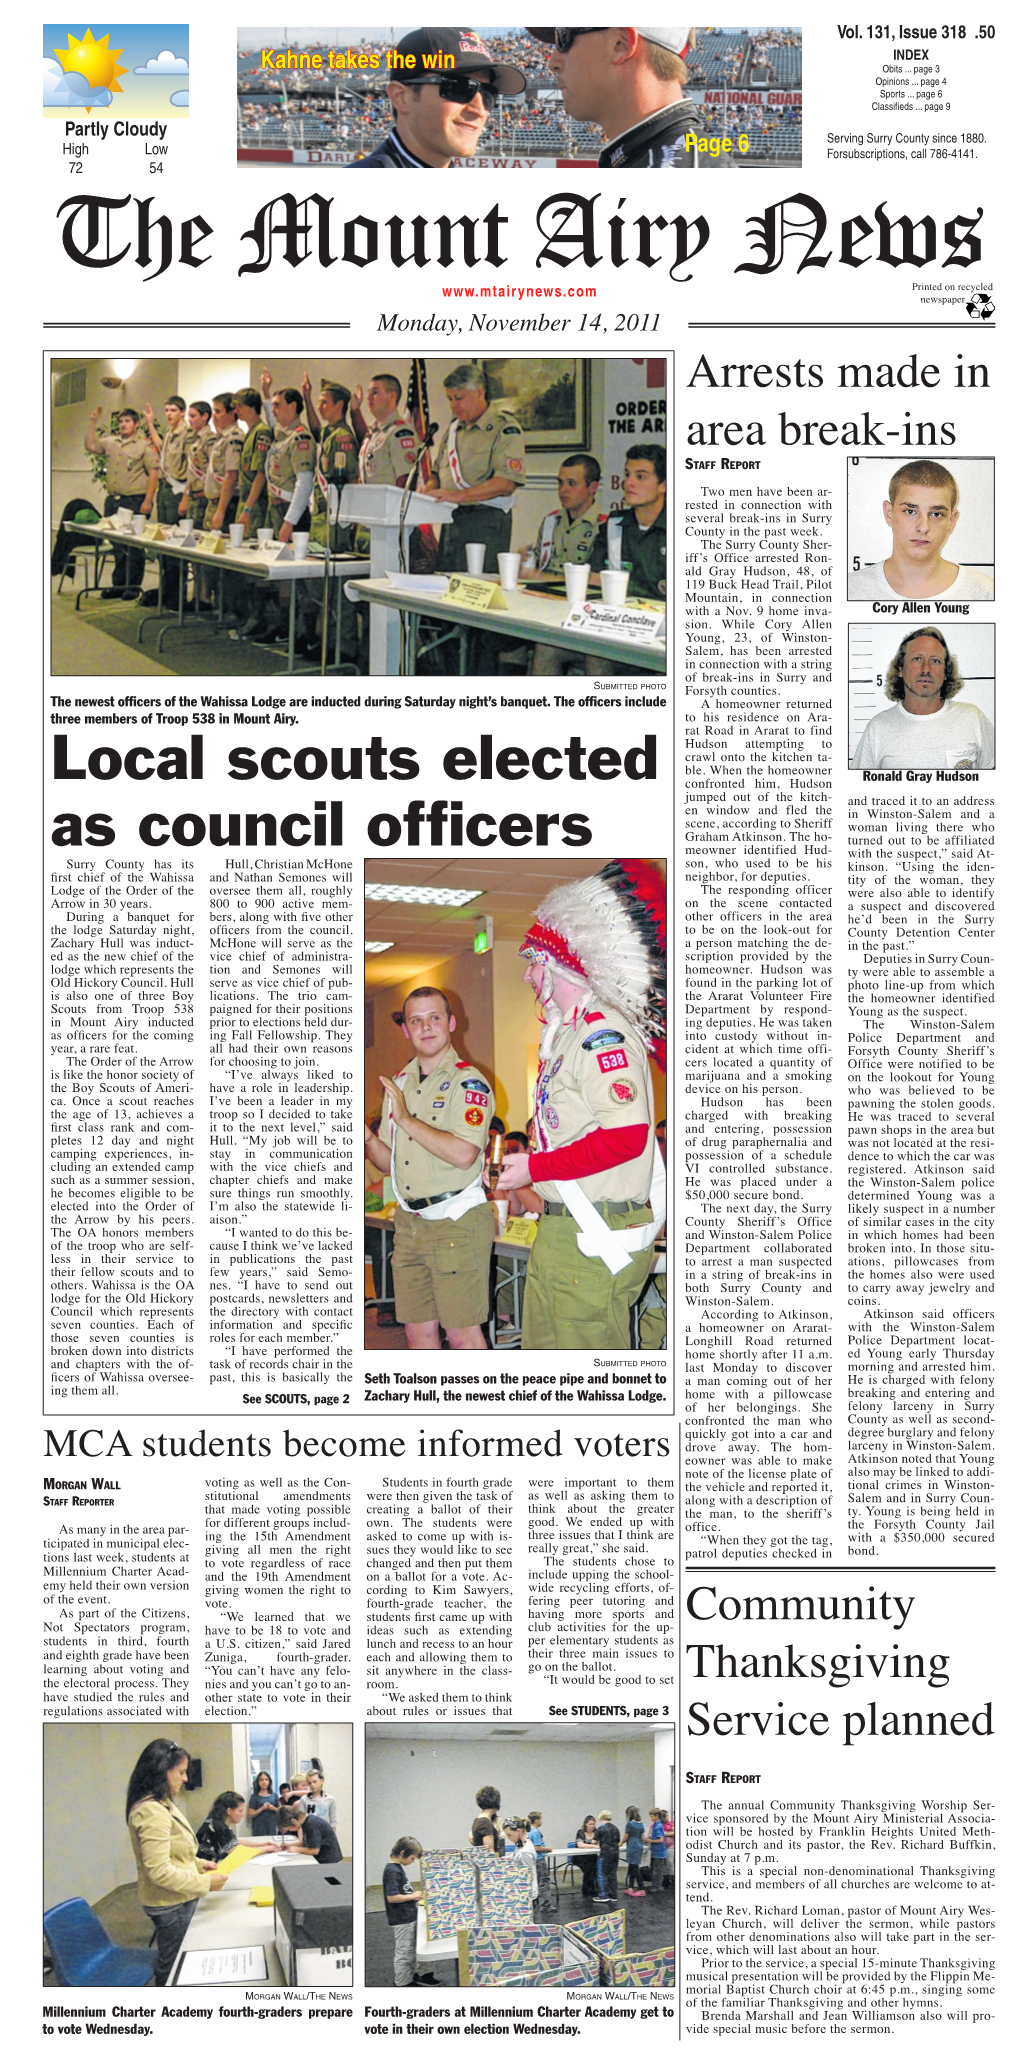 Local Scouts Elected As Council Officers